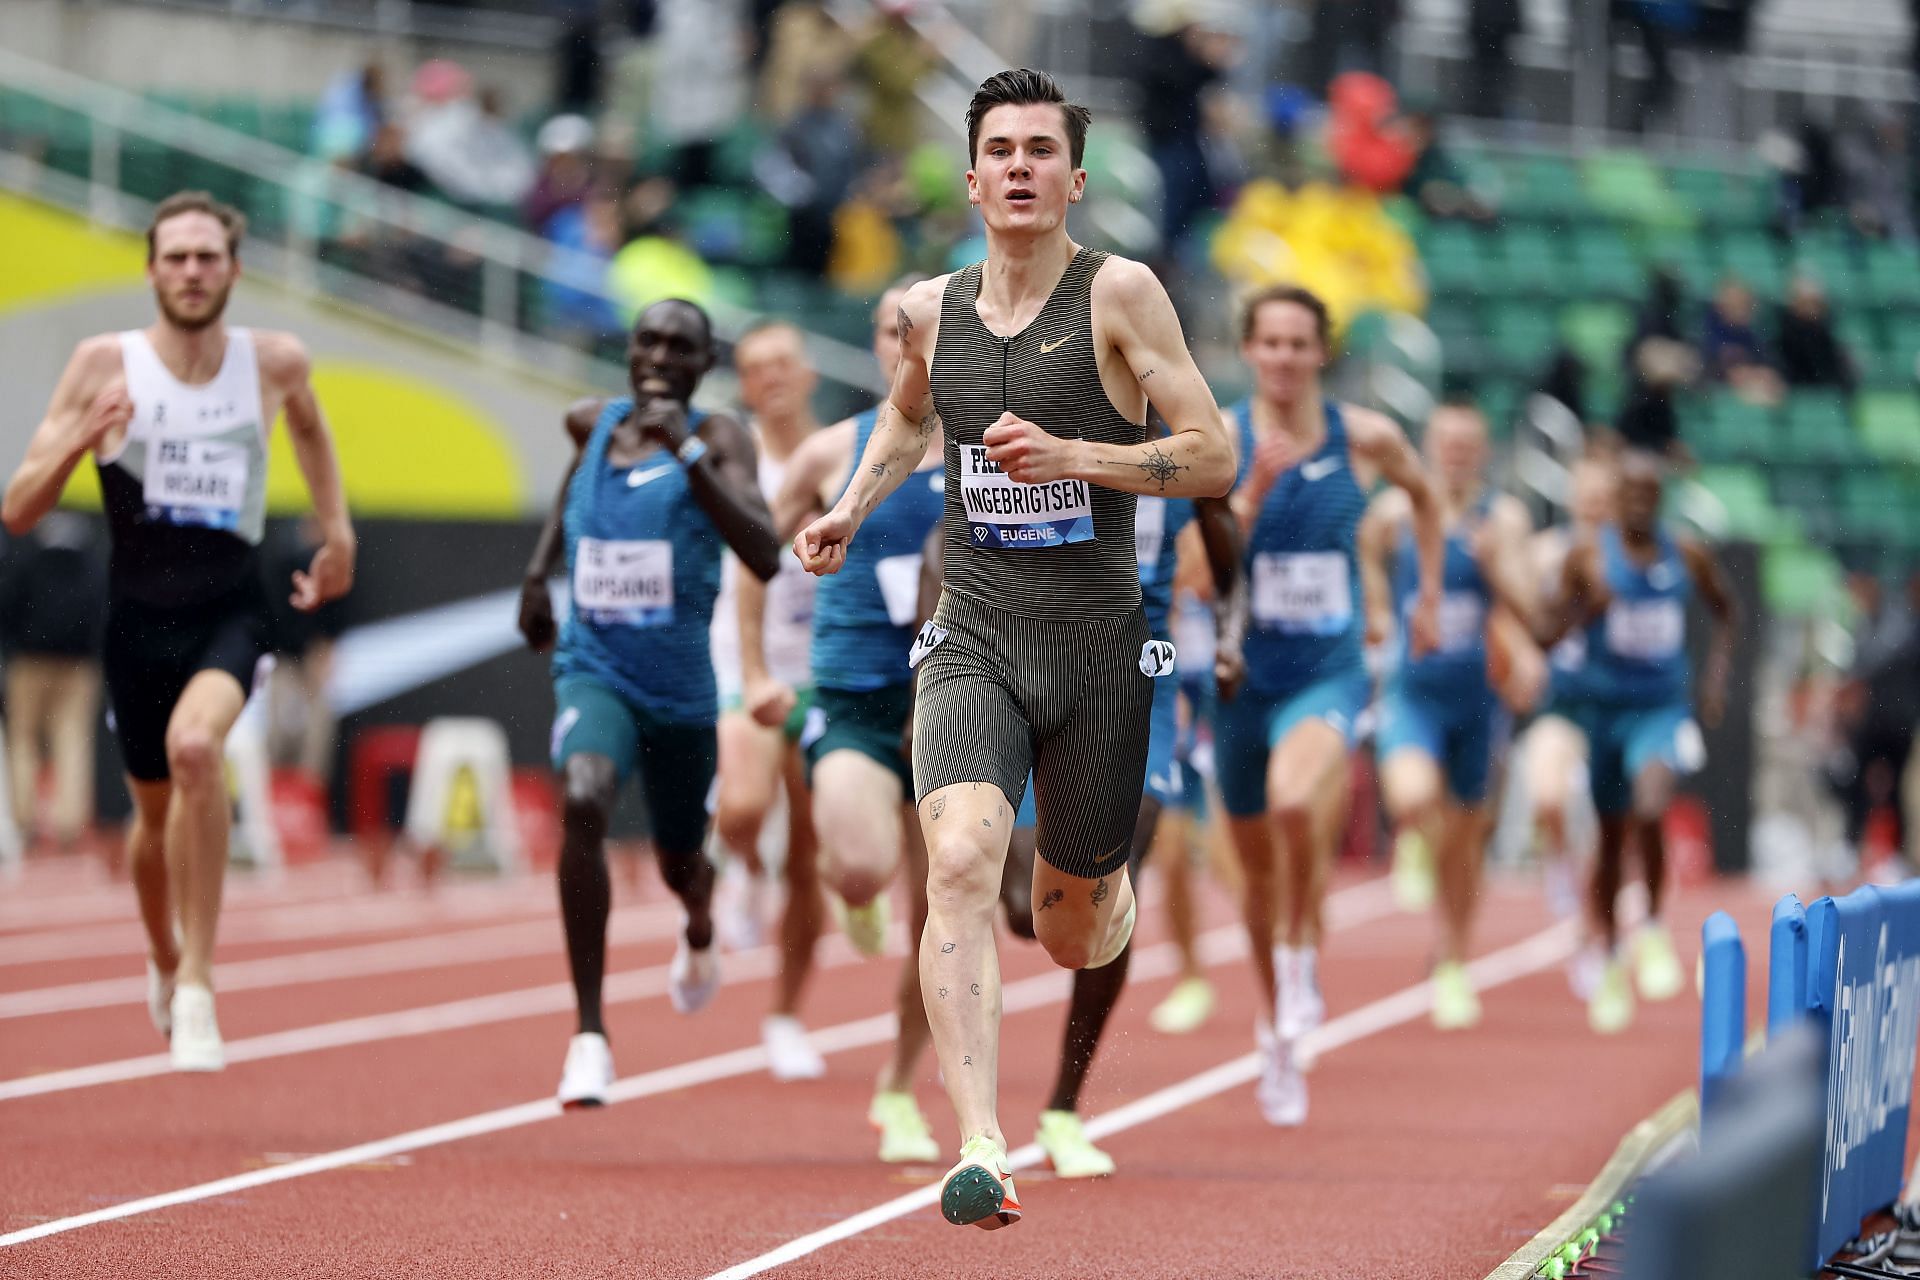 Jakob Ingerbrigtsen of Norway leads 1-mile race during the Wanda Diamond League Prefontaine Classic at Hayward Field on May 28, 2022, in Eugene, Oregon.